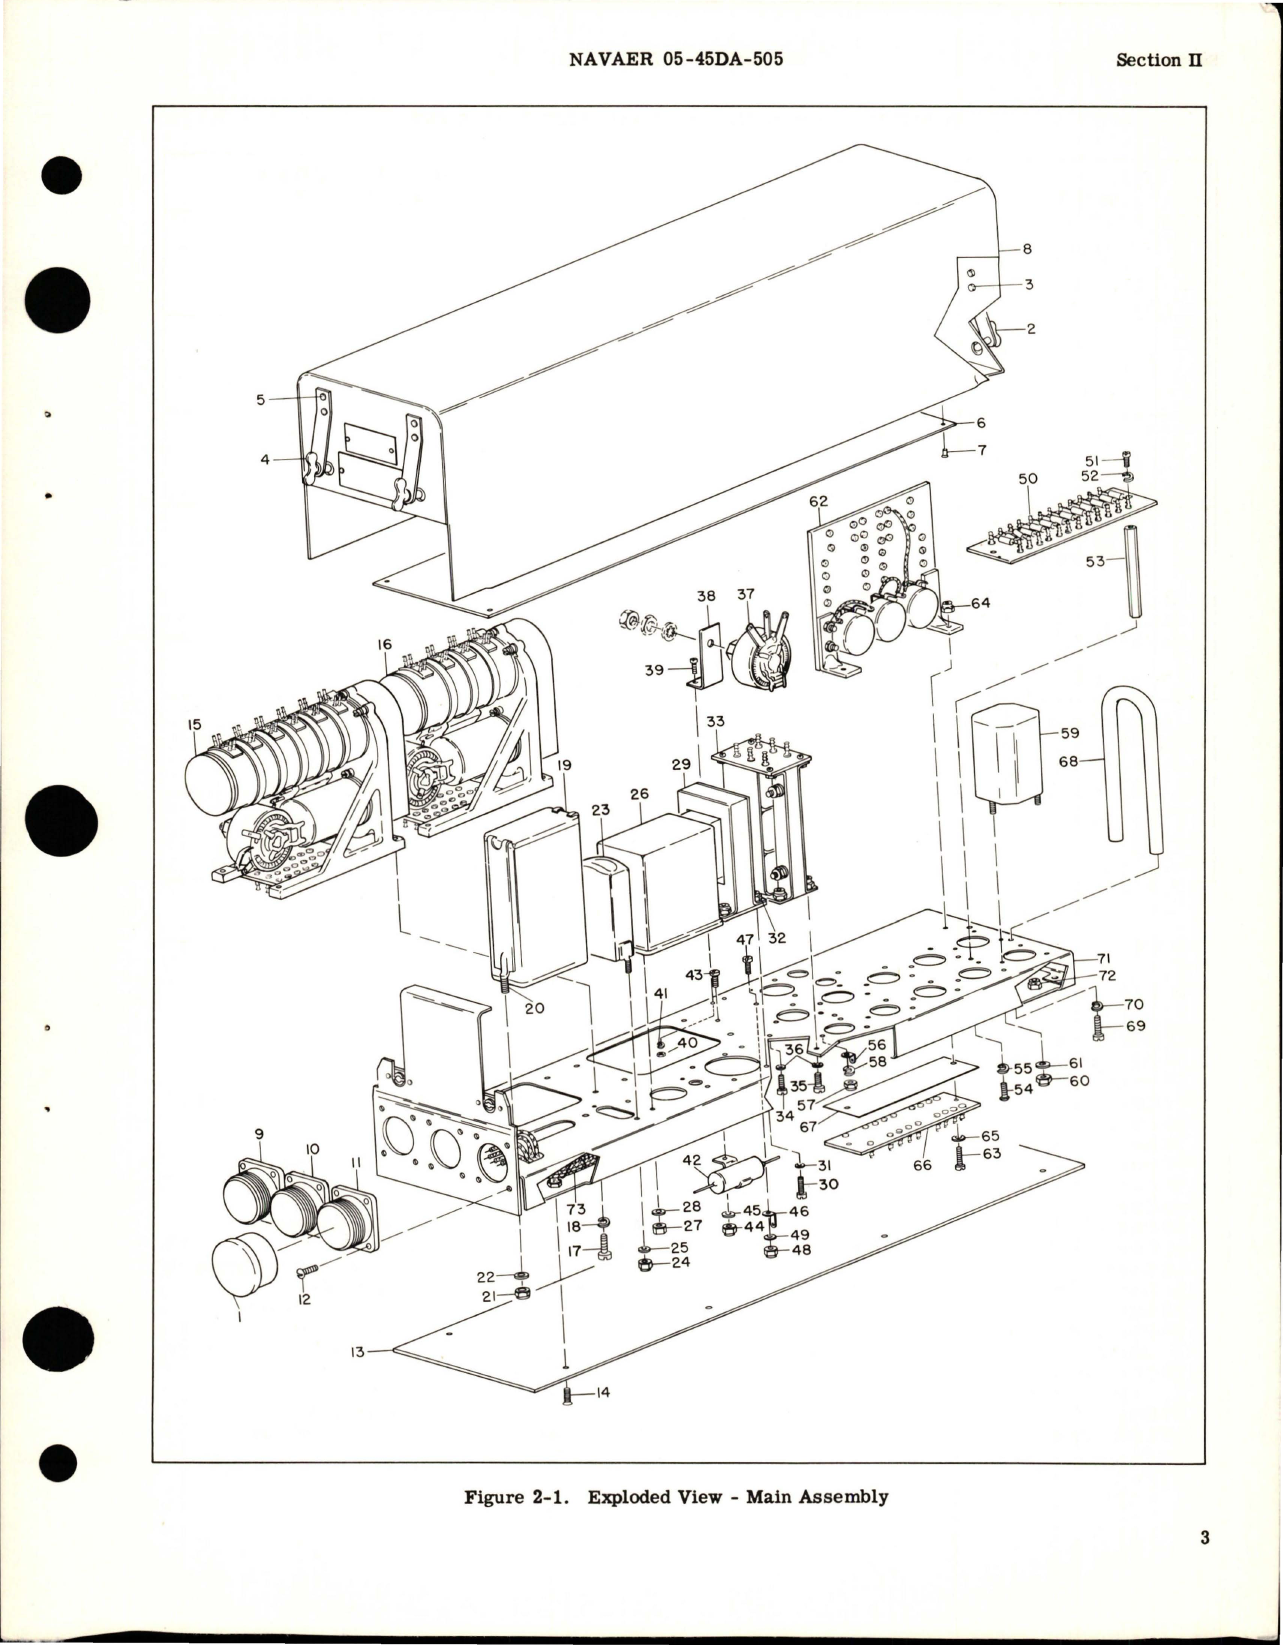 Sample page 7 from AirCorps Library document: Overhaul Instructions for Radio Remote Control - Part 15712-1-B 